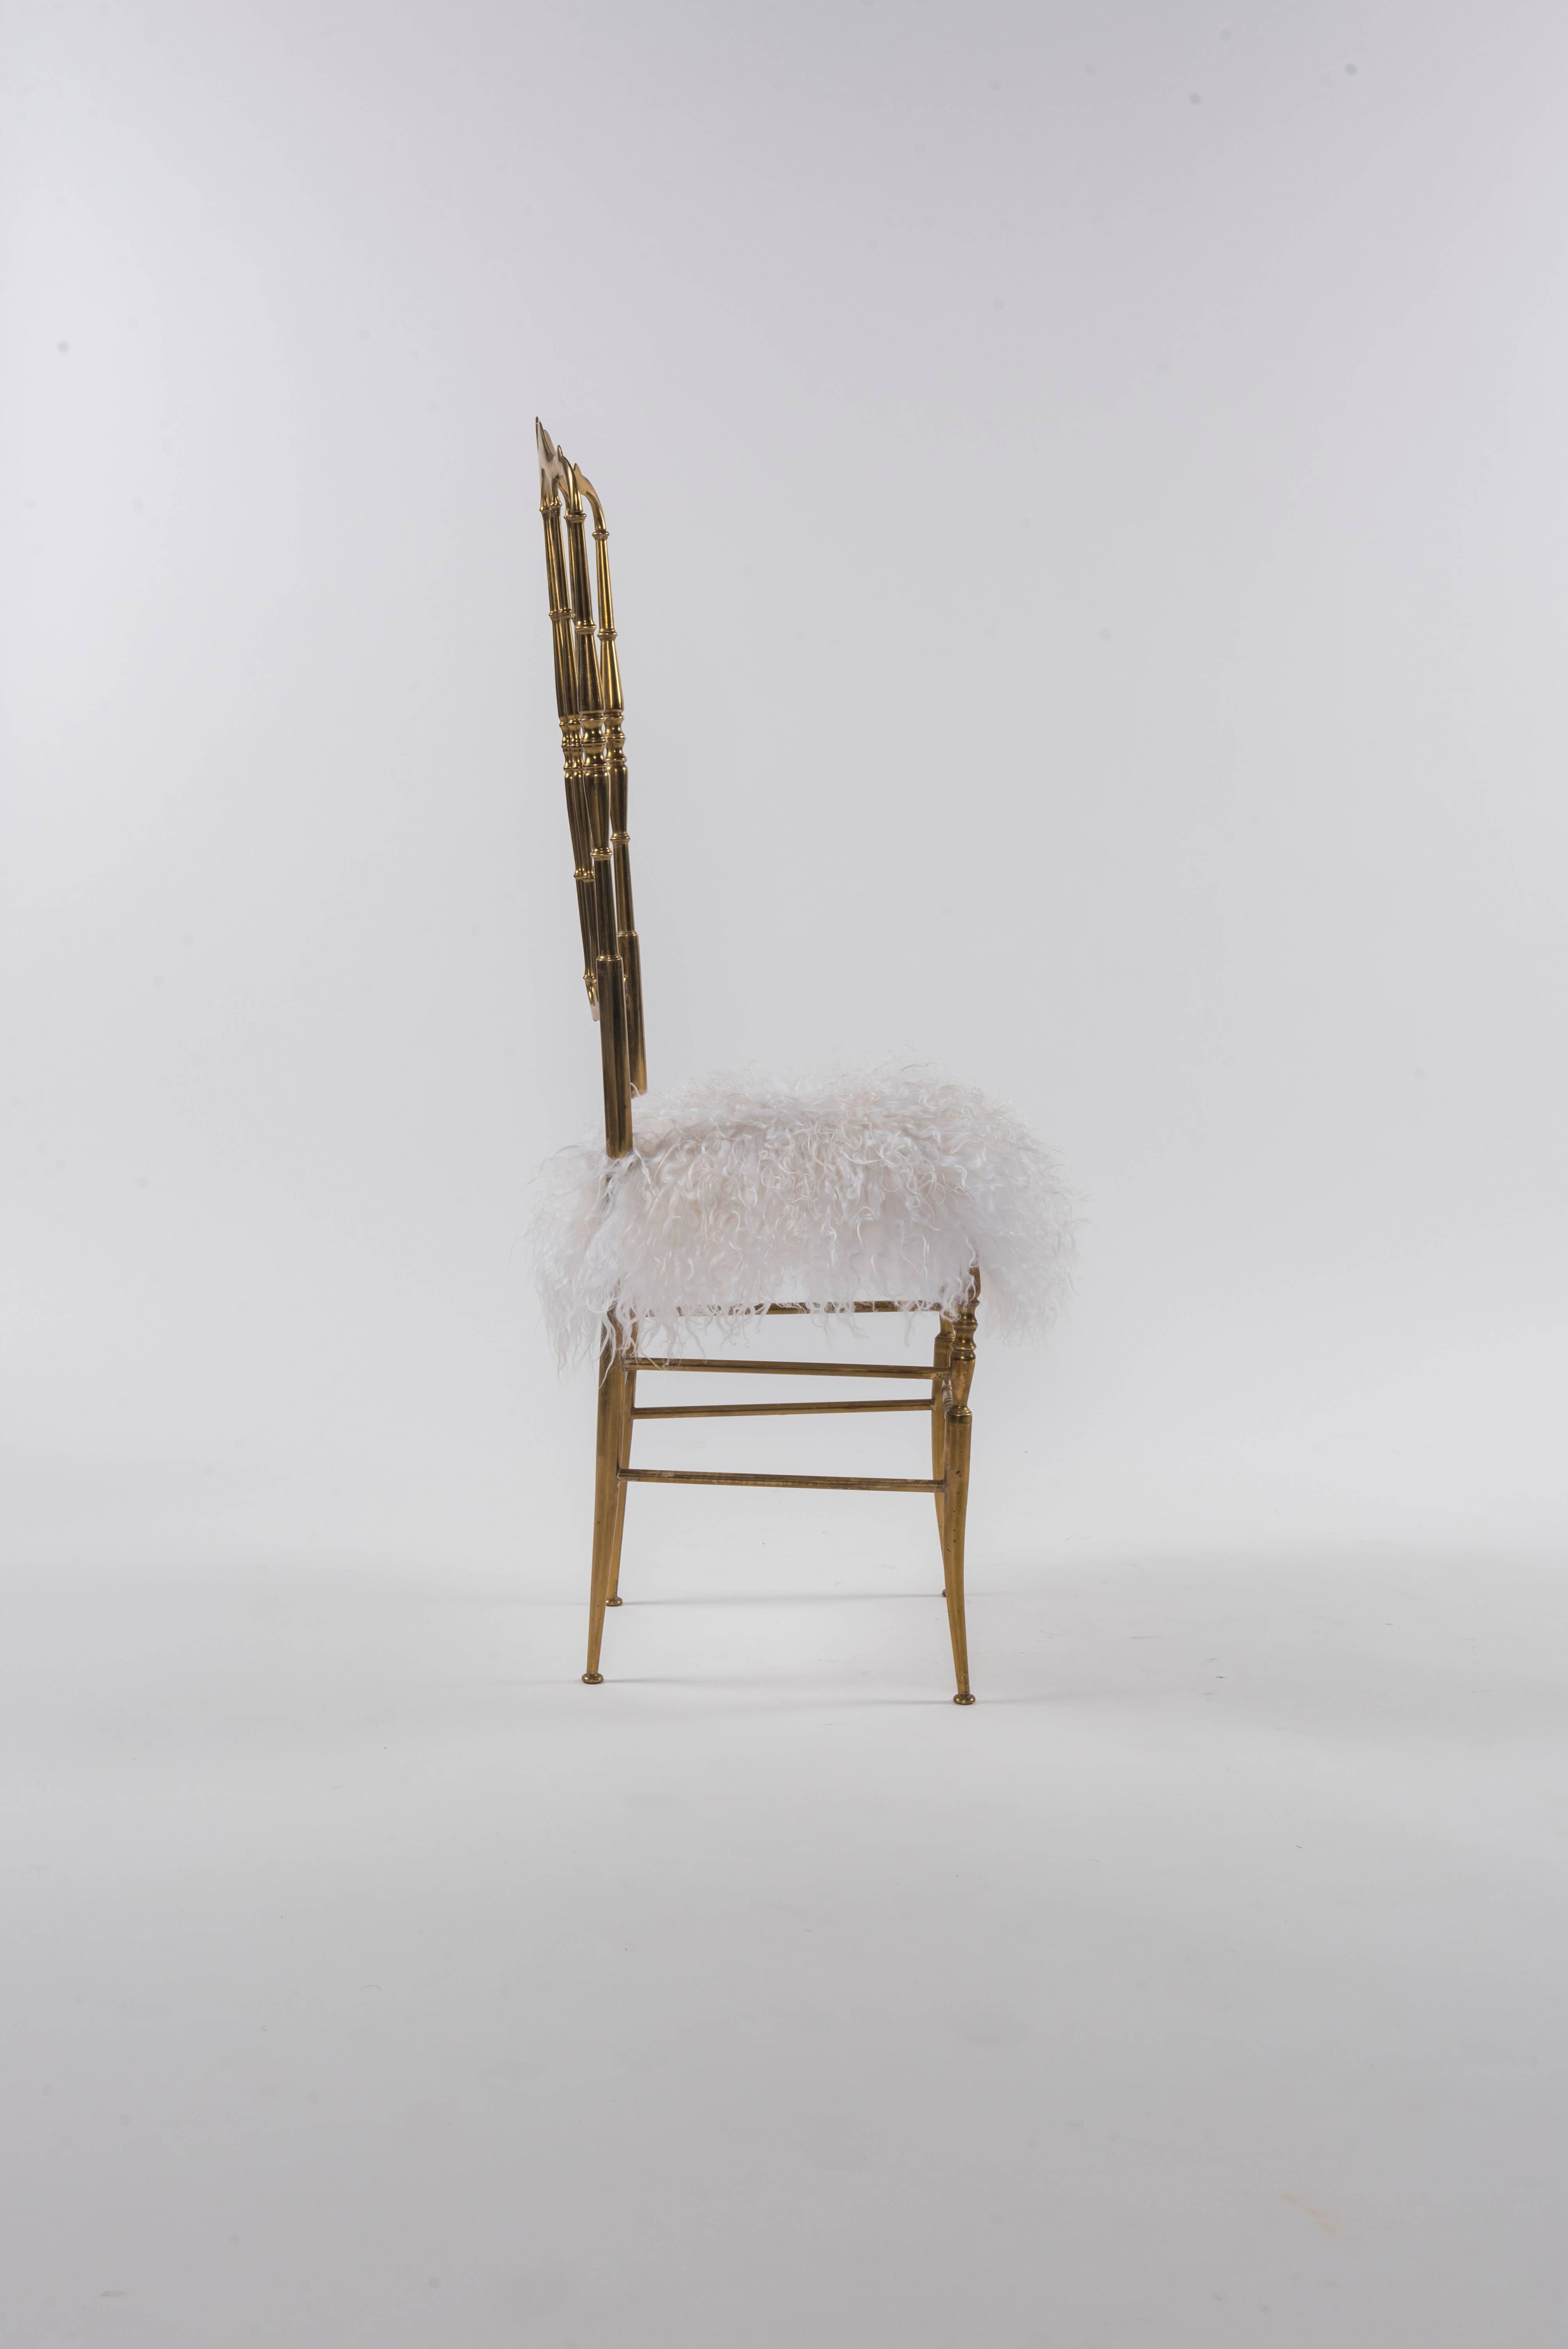 A vintage tall back Italian brass Chiavari chair newly upholstered in a snowy white Icelandic sheepskin fur.